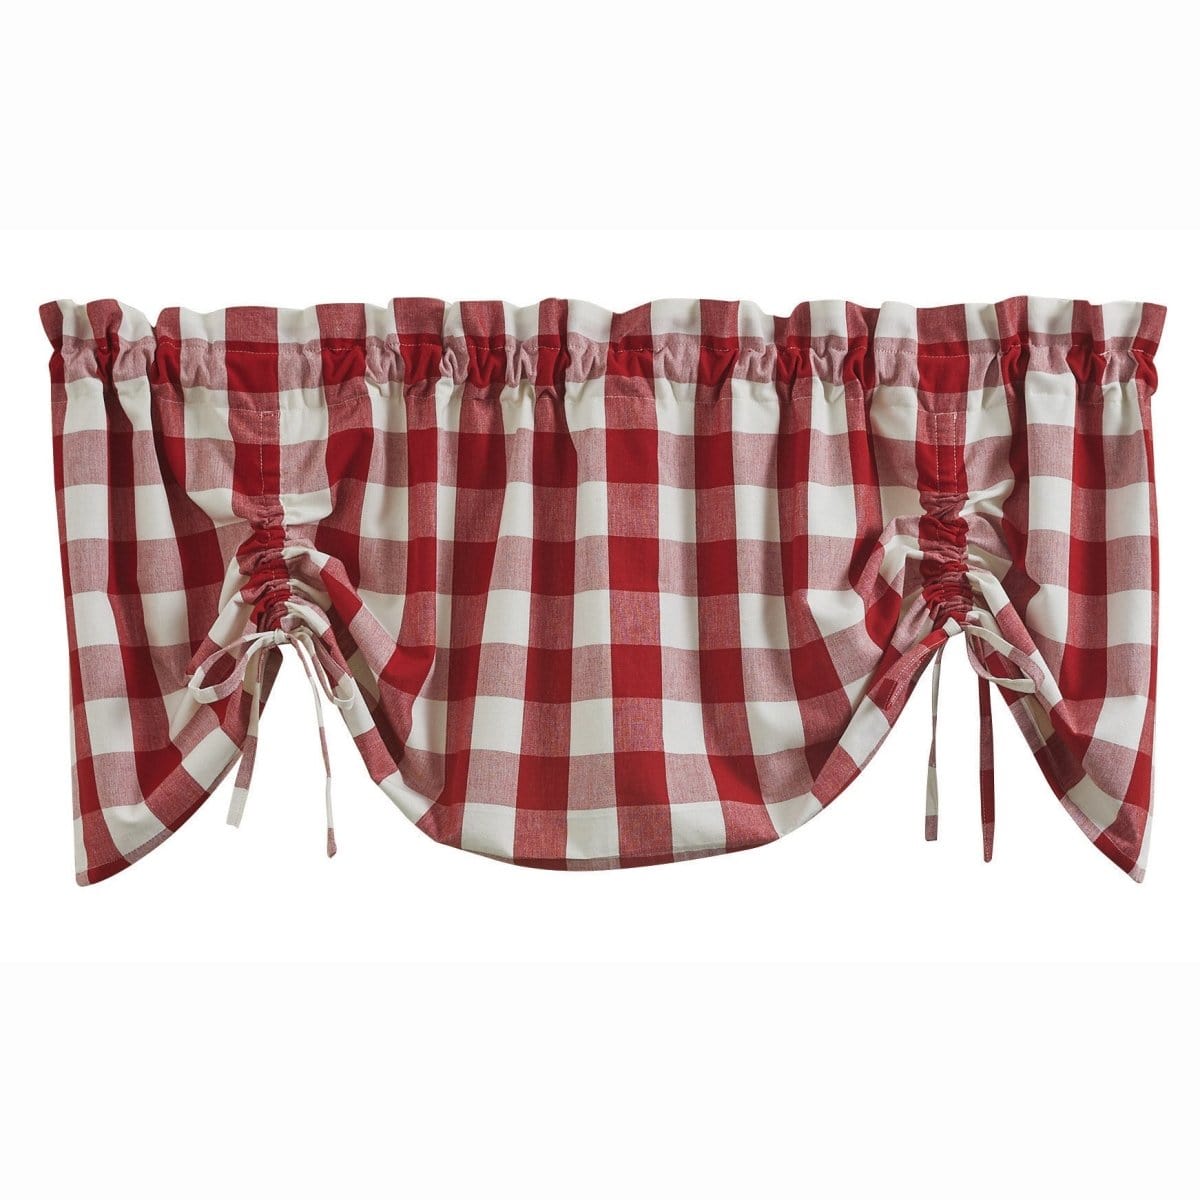 Wicklow Check in Red Tie Up Farmhouse Valance Lined-Park Designs-The Village Merchant